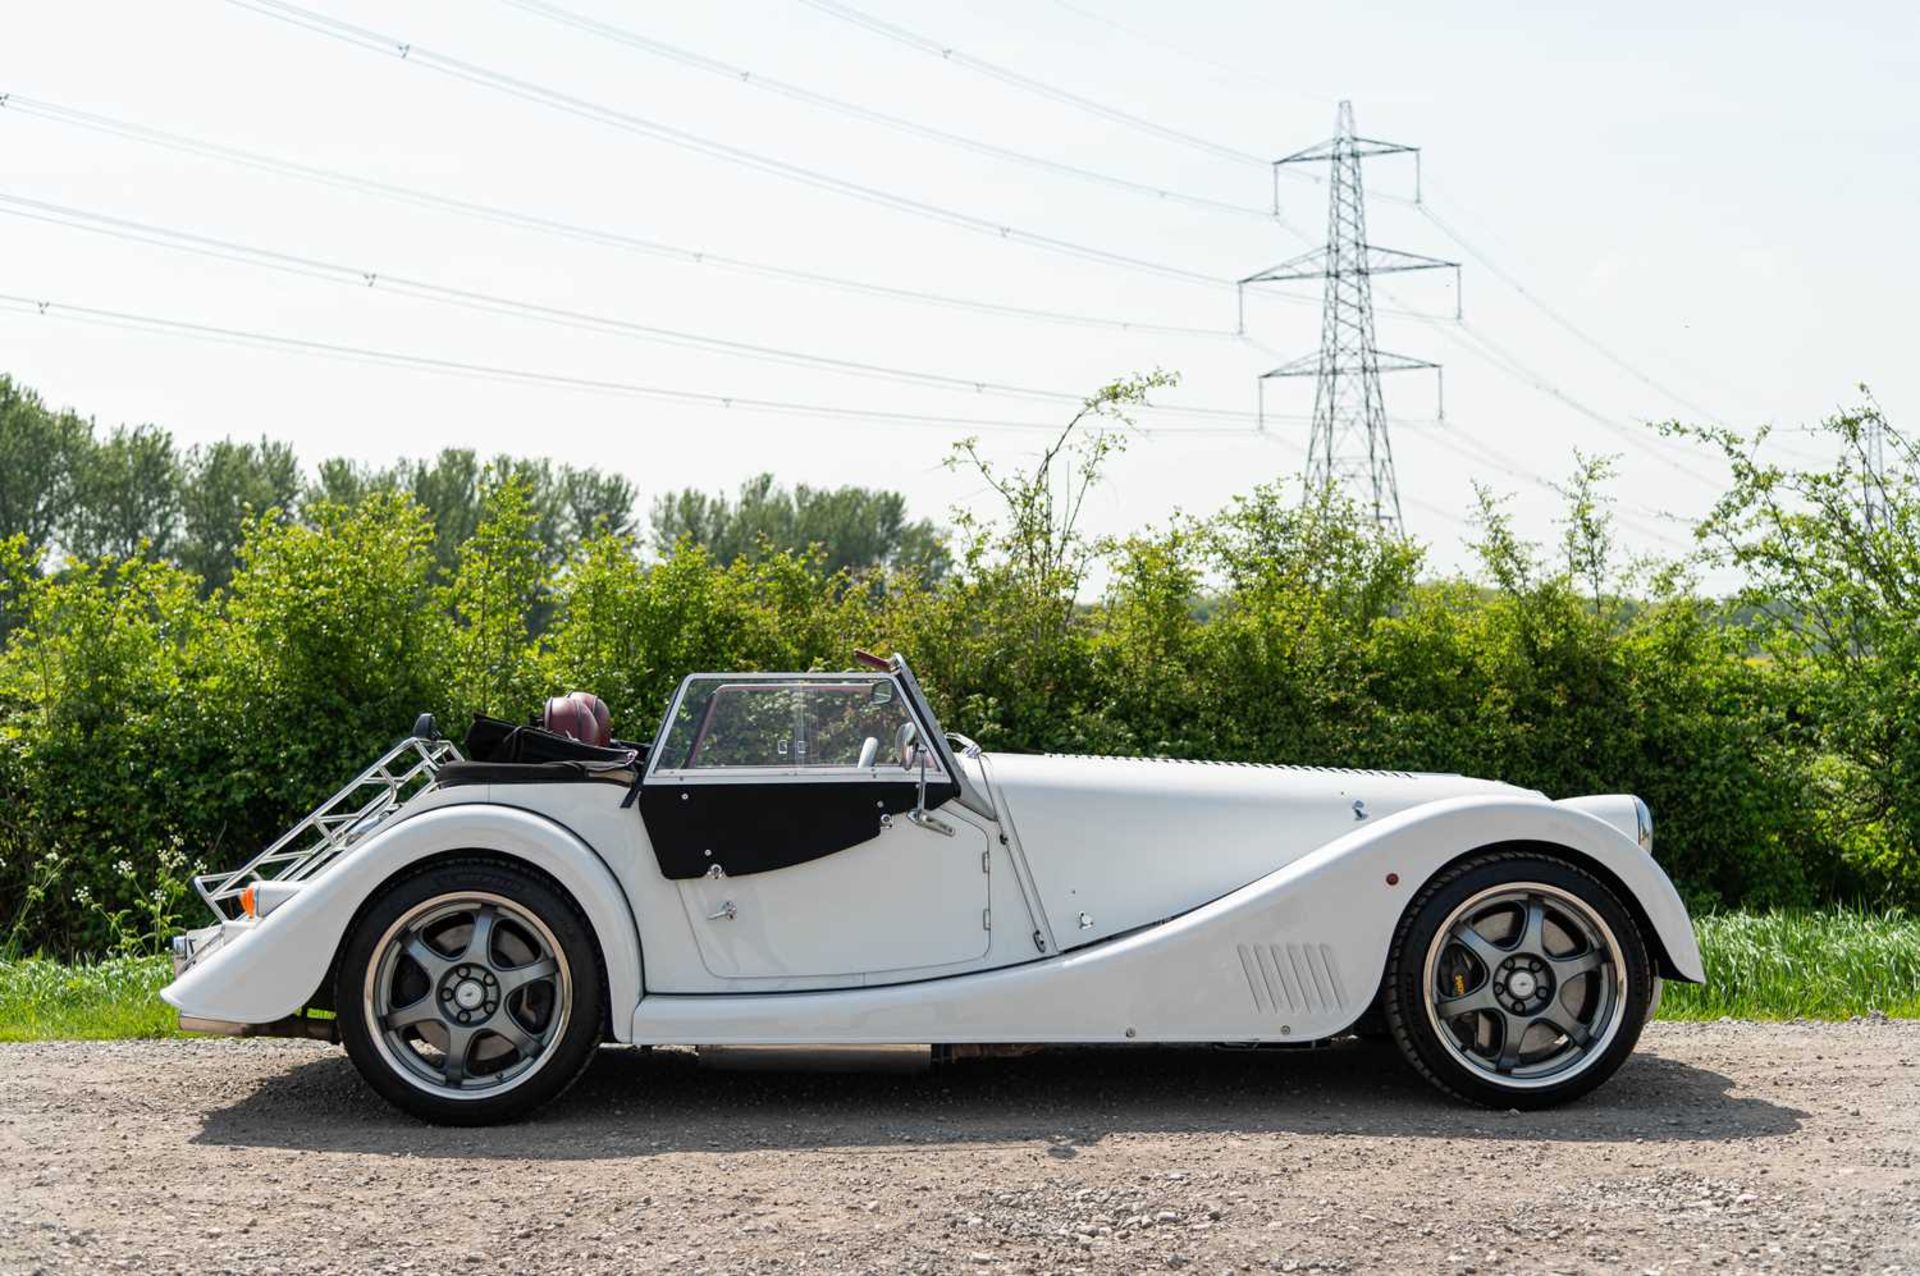 2012 Morgan Plus 8 ***NO RESERVE*** Believed to be one of just 60 produced and with MOT records supp - Image 19 of 74